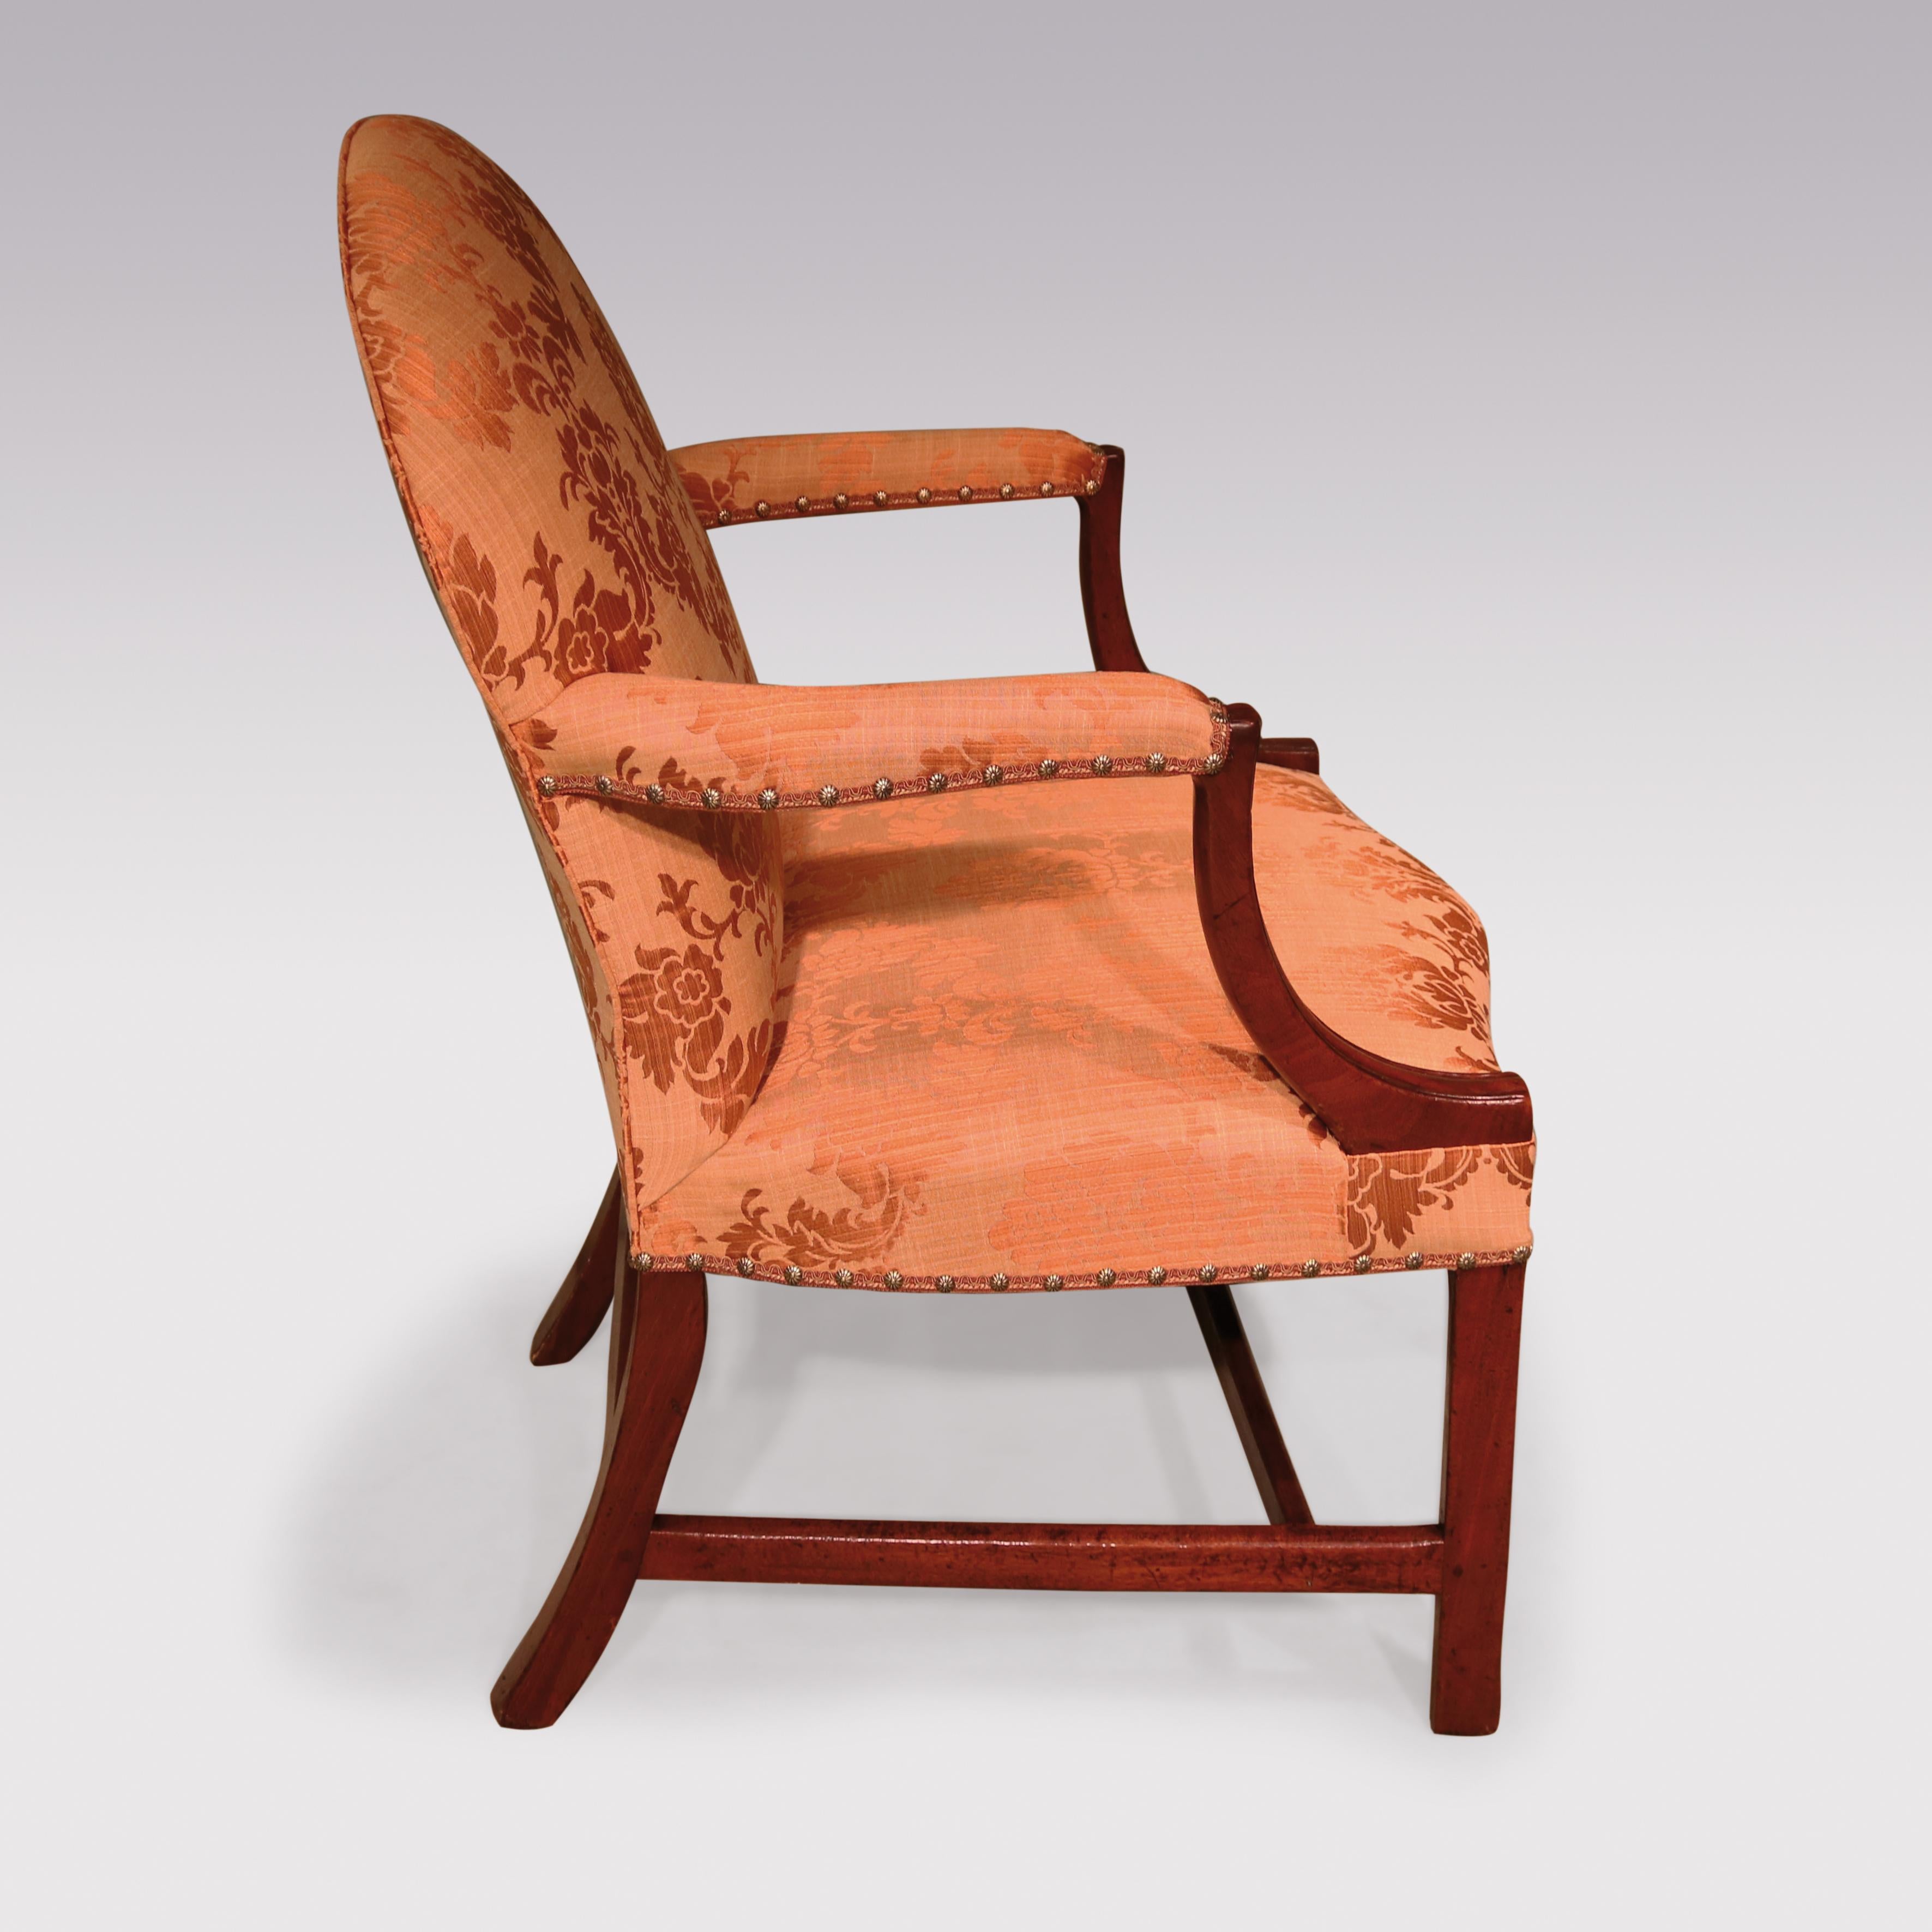 A mid 18th century George III period mahogany Gainsborough armchair, having rounded top above set-back shaped arms with moulded supports, raised on moulded square legs with square stretchers.